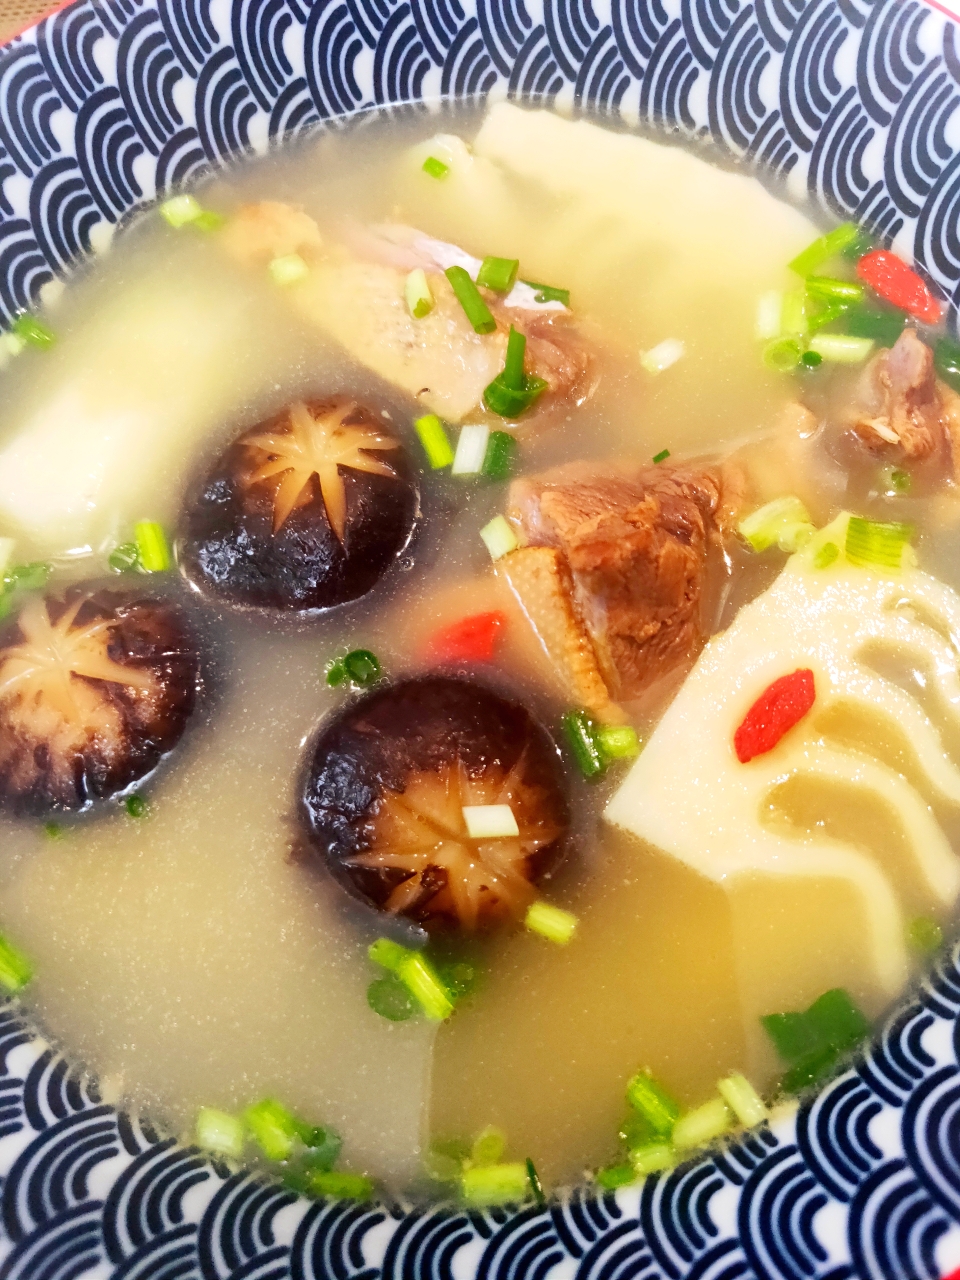 
The practice of soup of duck of winter bamboo shoots, how is soup of duck of winter bamboo shoots done delicious